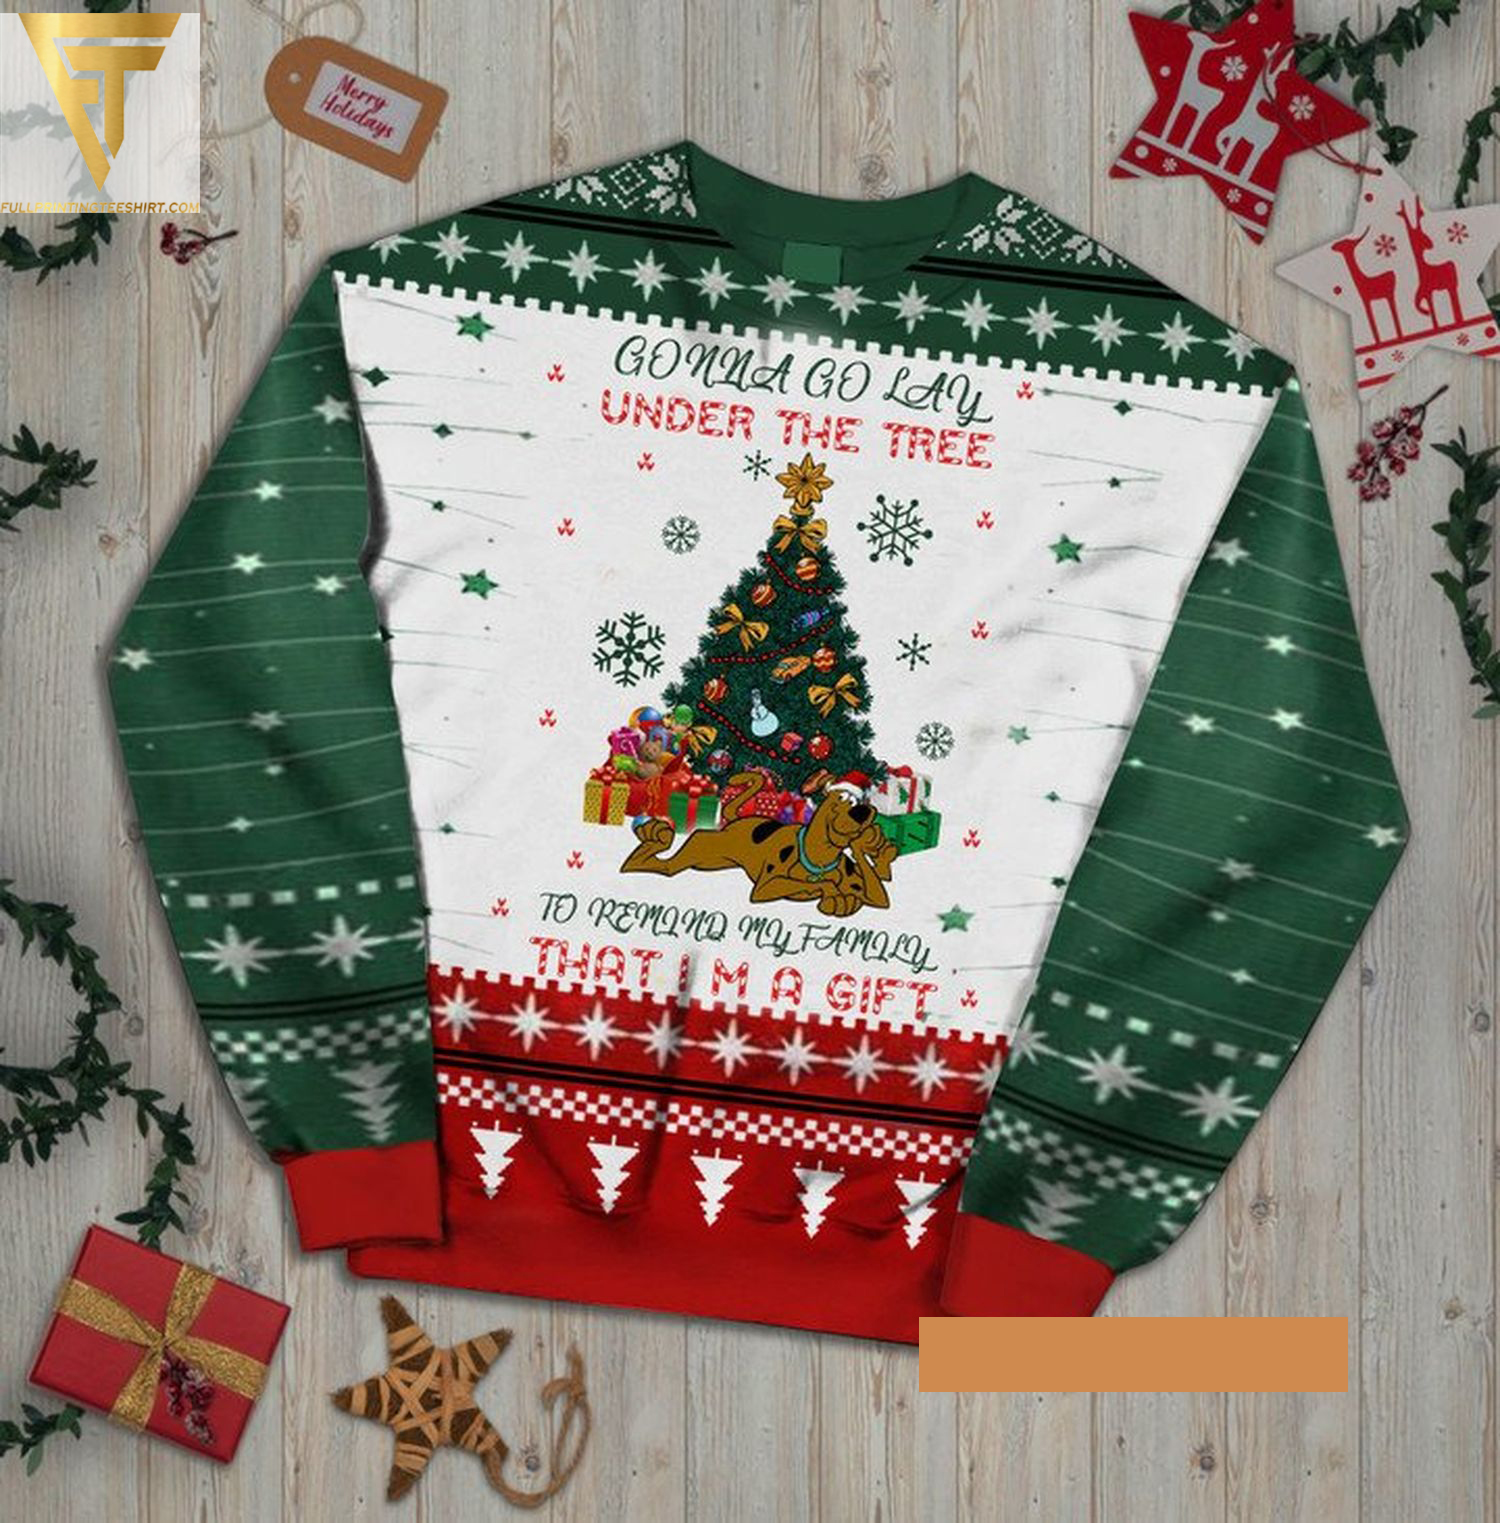 Scooby-doo gonna go play ugly christmas sweater - Copy (2)